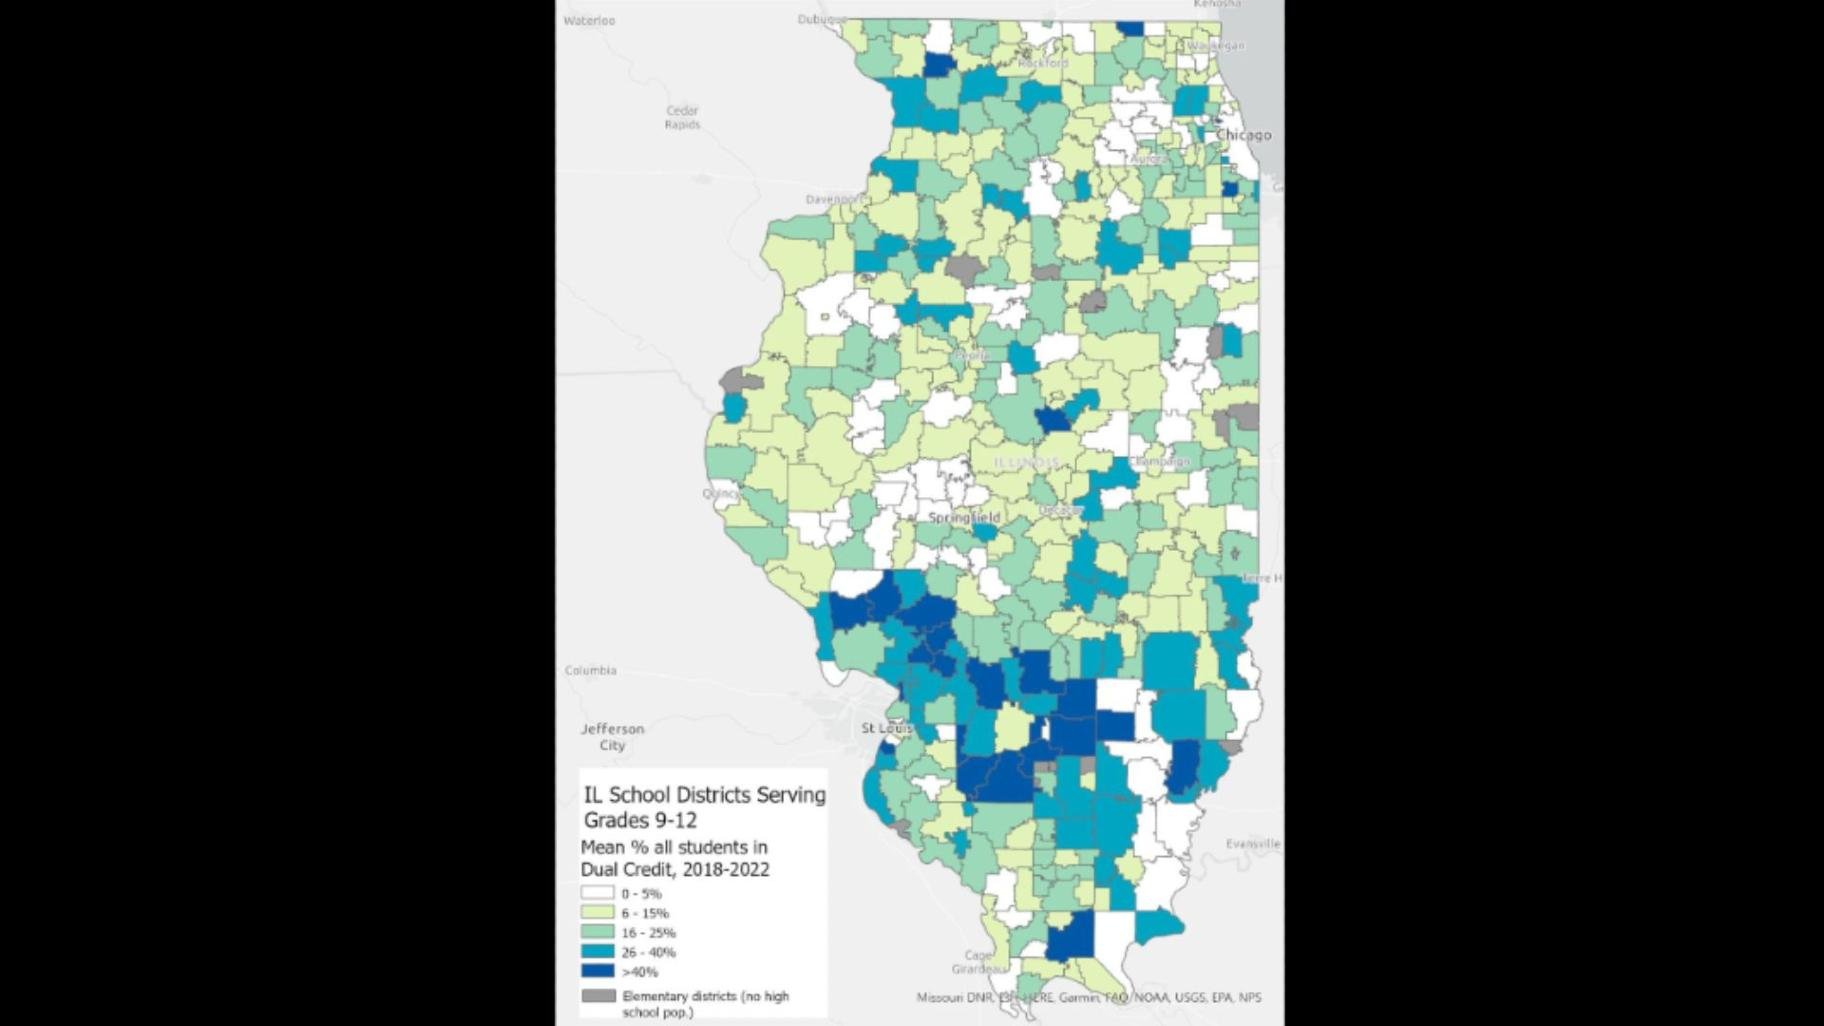 Dual credit programs that allow students to earn both high school and college credit simultaneously are more available in southern Illinois districts than in other parts of the state. (Credit: Illinois Workforce & Education Research Collaborative)